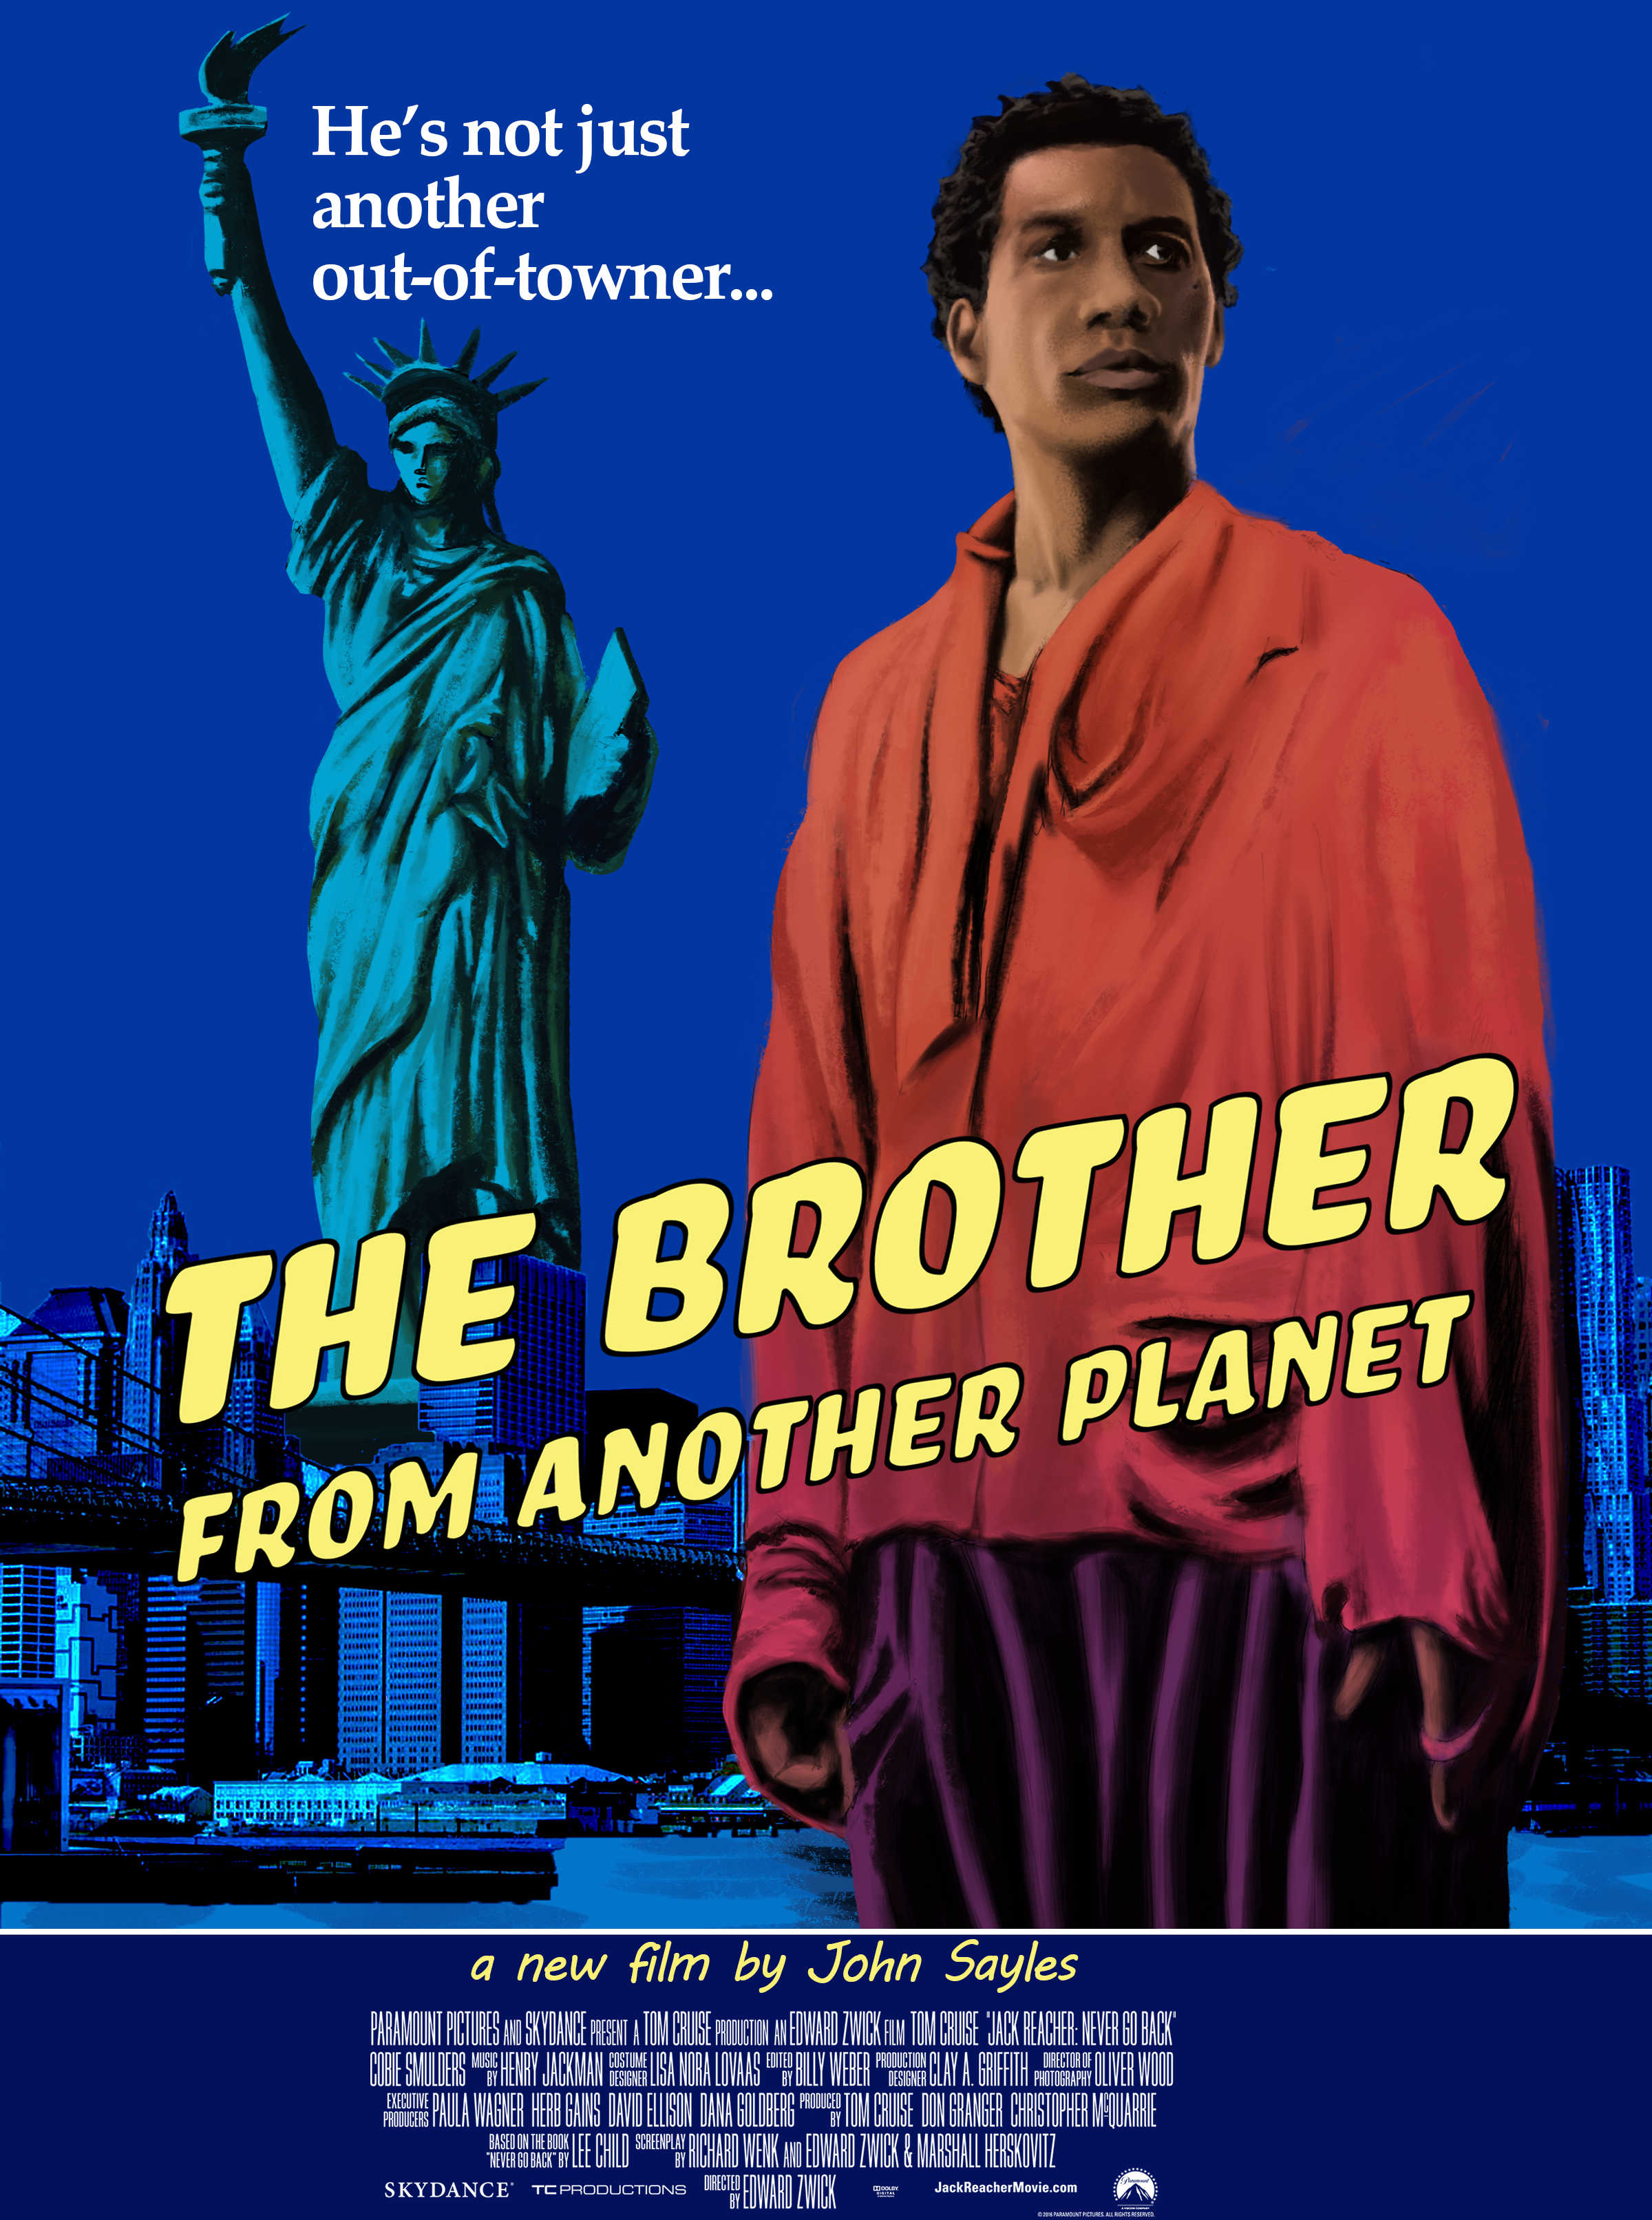 The Brother from Another Planet recreation poster